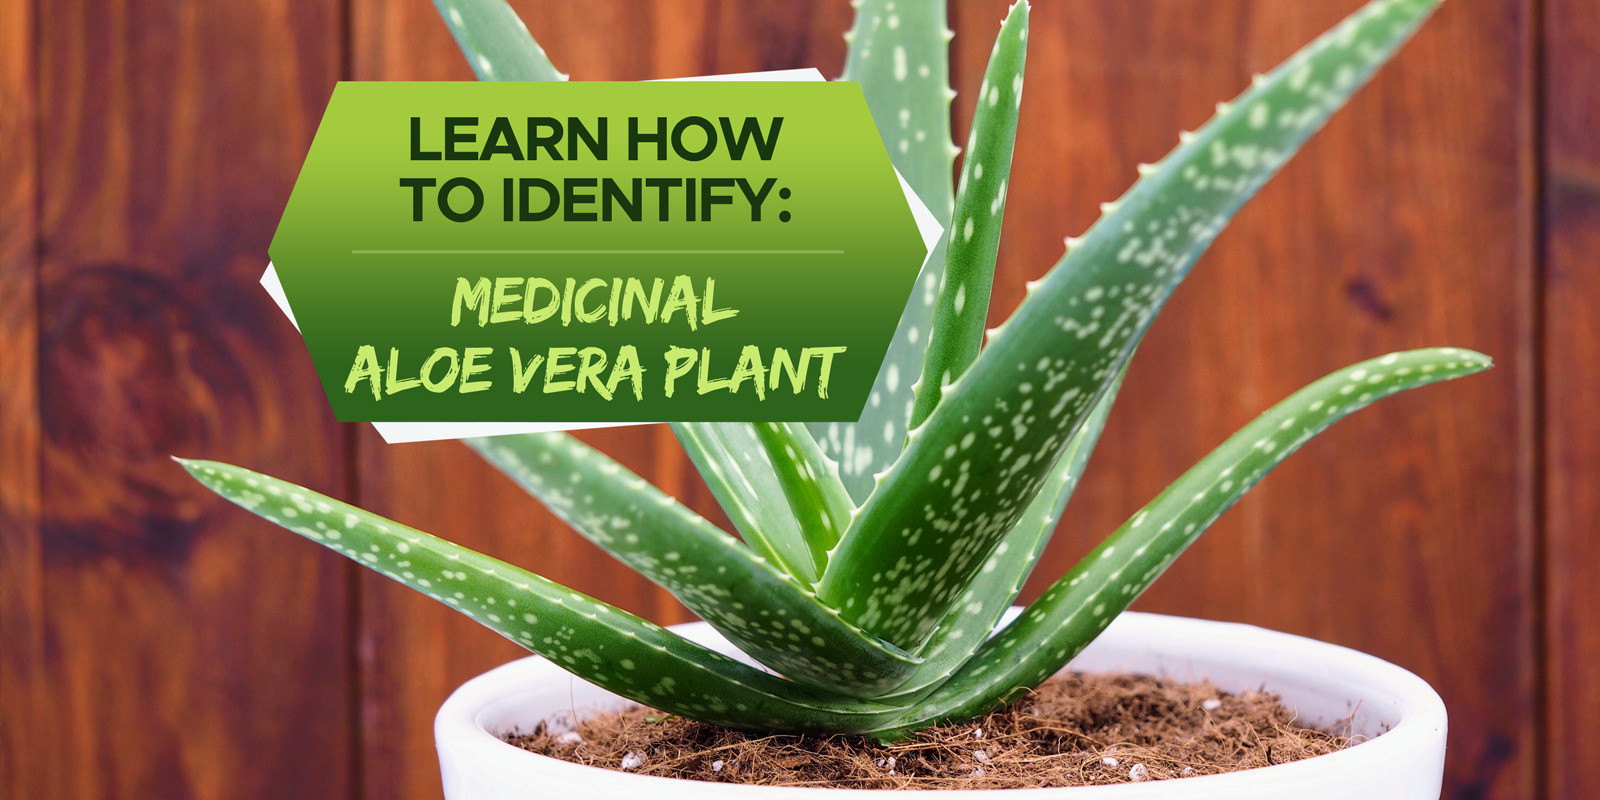 How To Identify Medicinal Aloe Vera Plant - Grow Your Yard